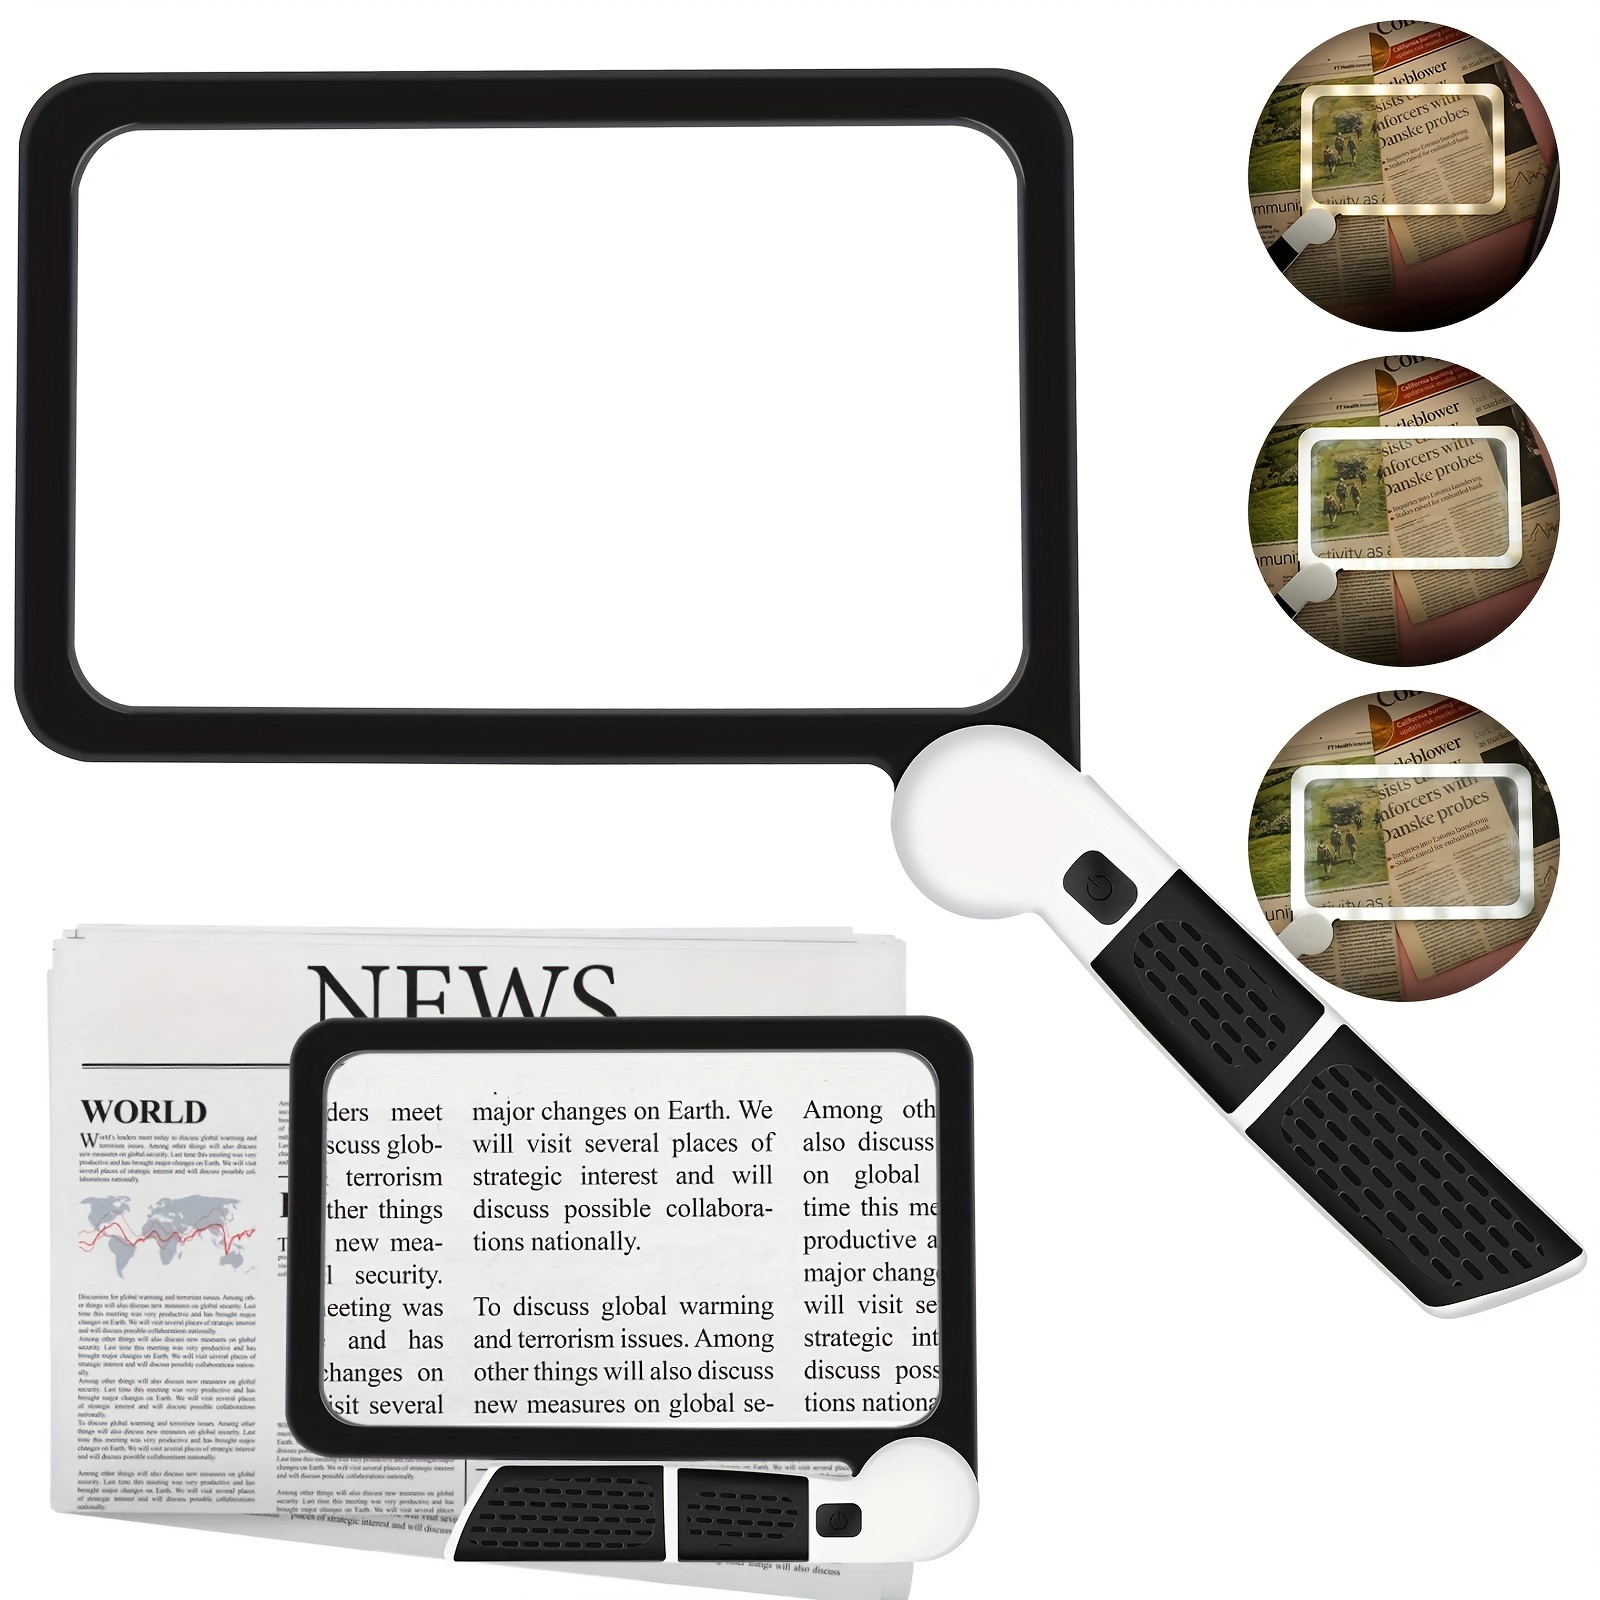 Foldable 5/11X Magnifying Glass Stand Table Magnifier With 8 LED